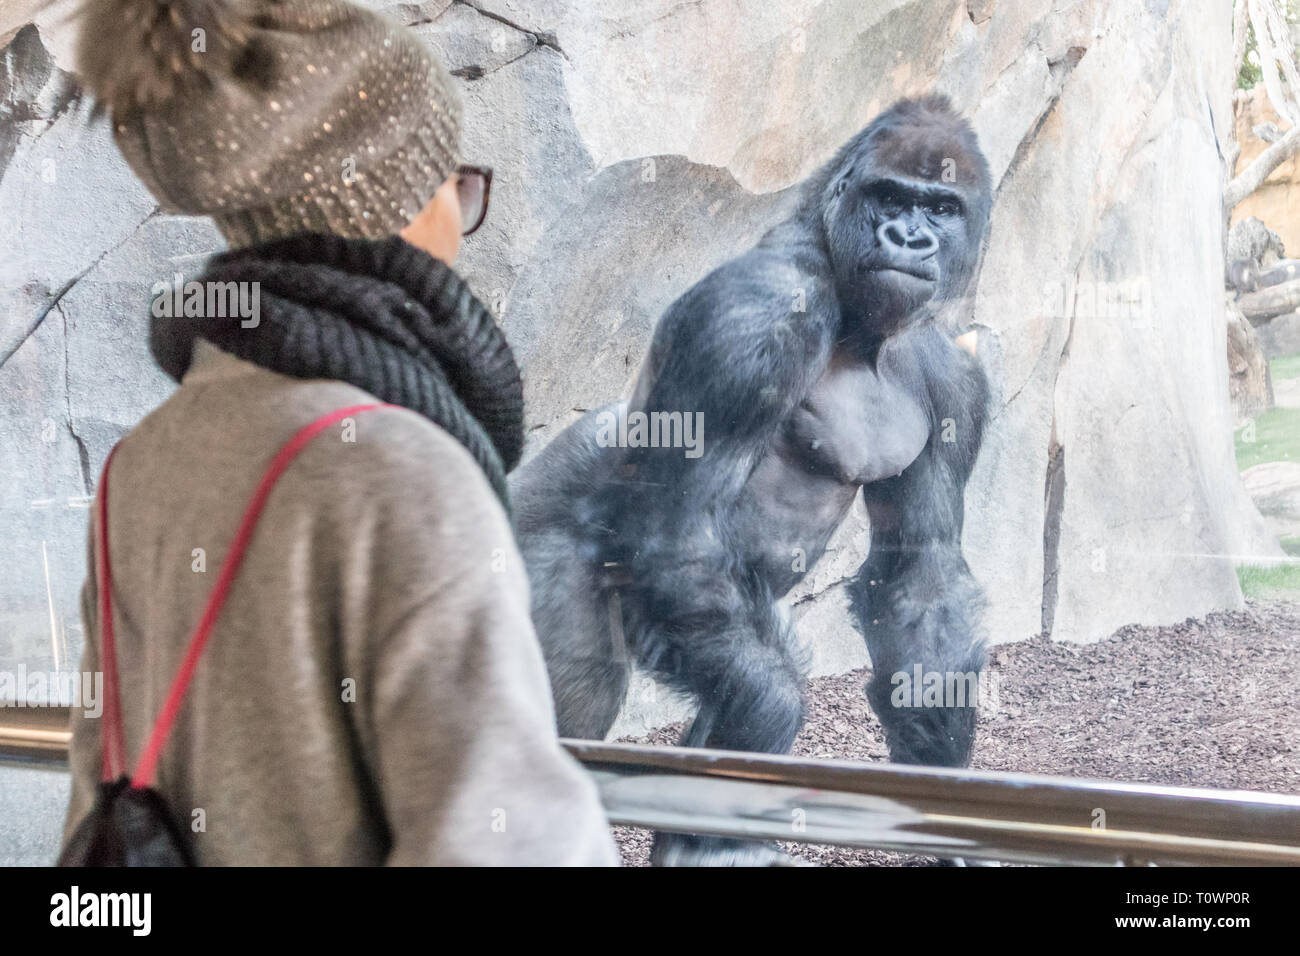 Woman watching huge silverback gorilla male behind glass in zoo. Gorilla staring at female zoo visitor in Biopark in Valencia, Spain Stock Photo